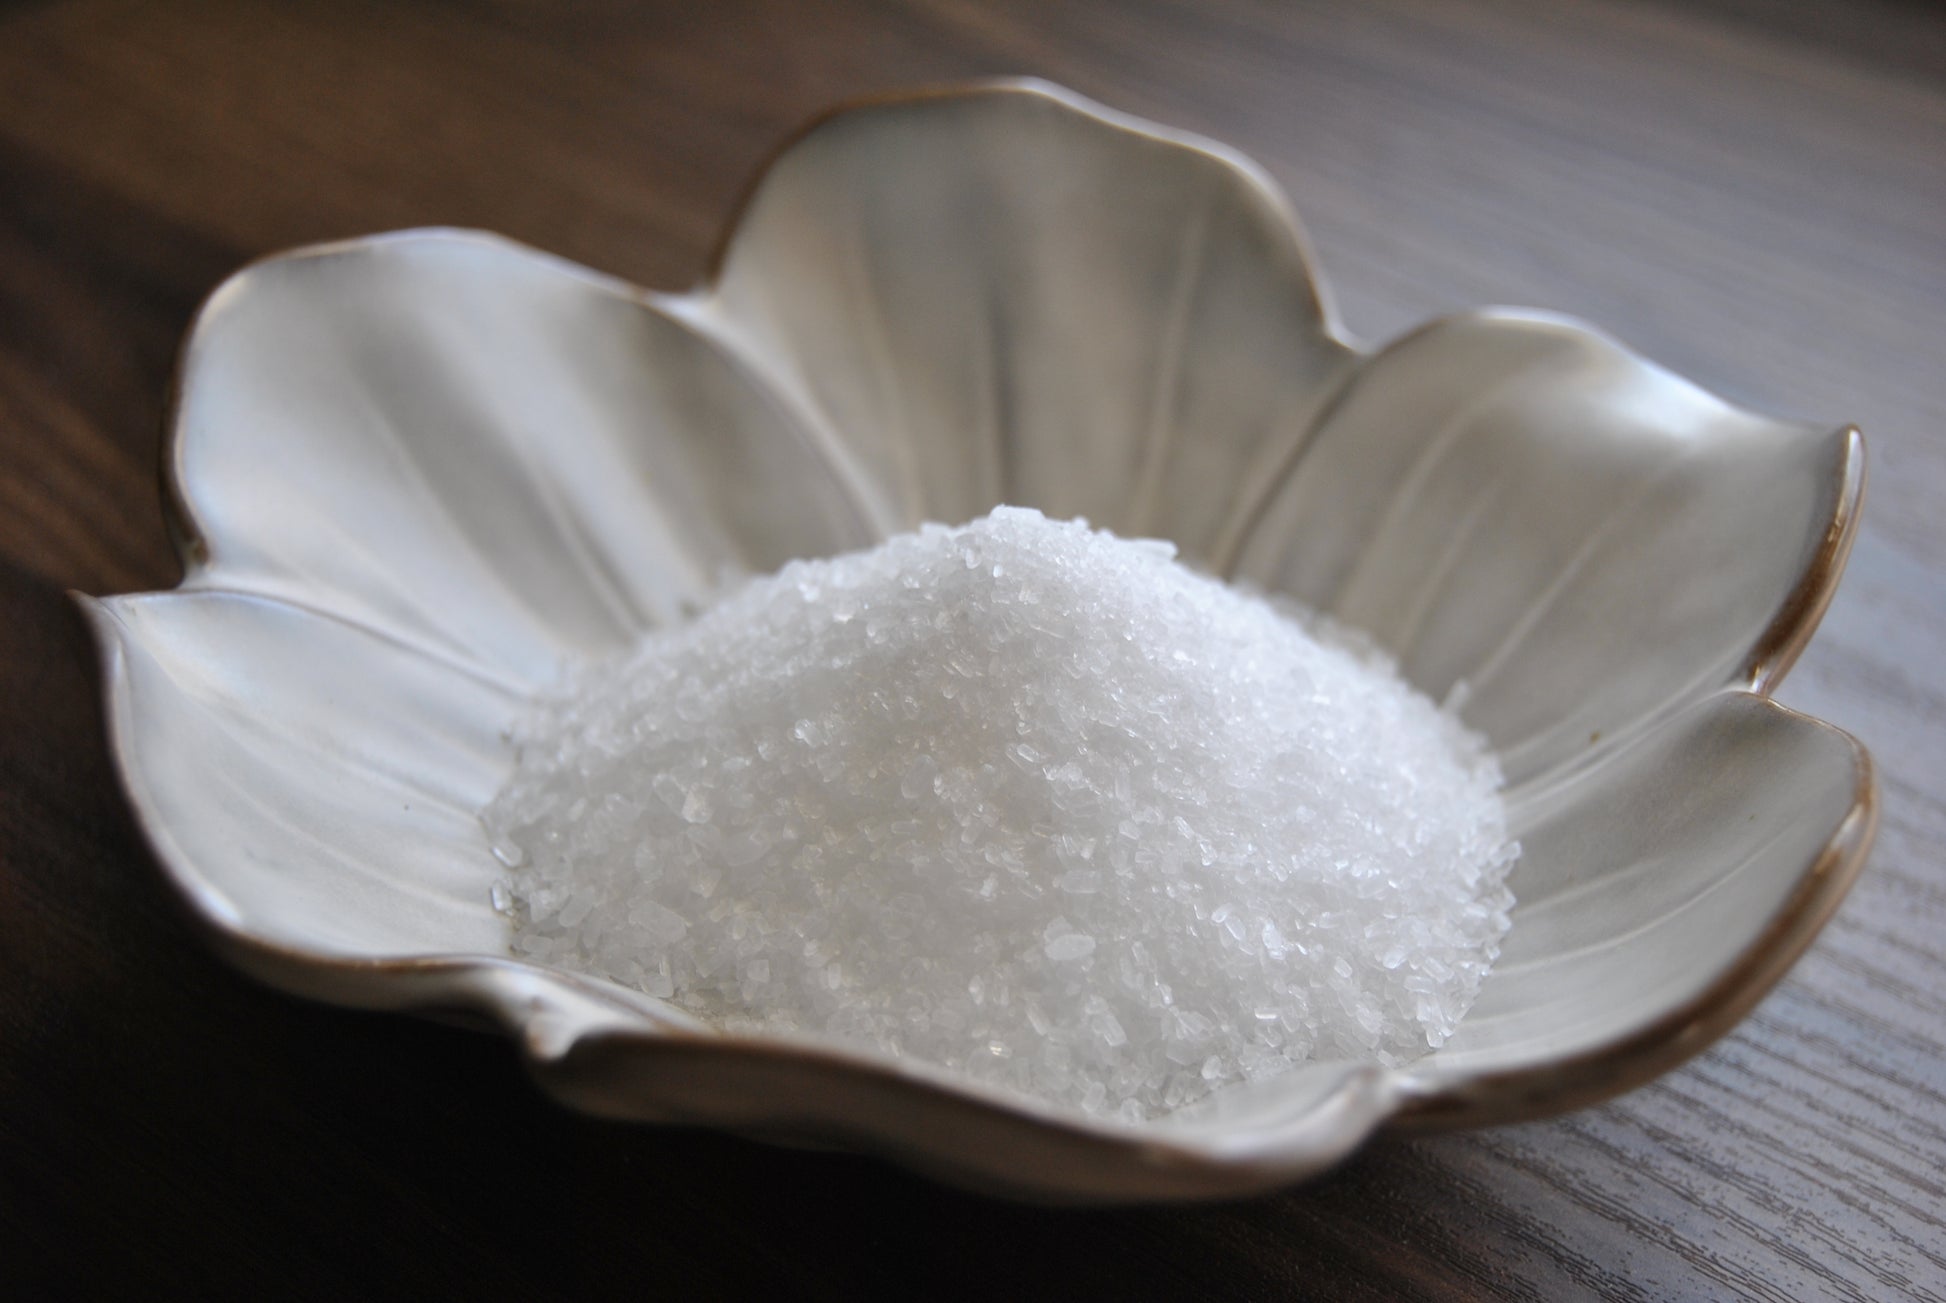 A close up view of the crystalline and clear epsom salt rests in a white, flower shaped dish on a wooden surface.